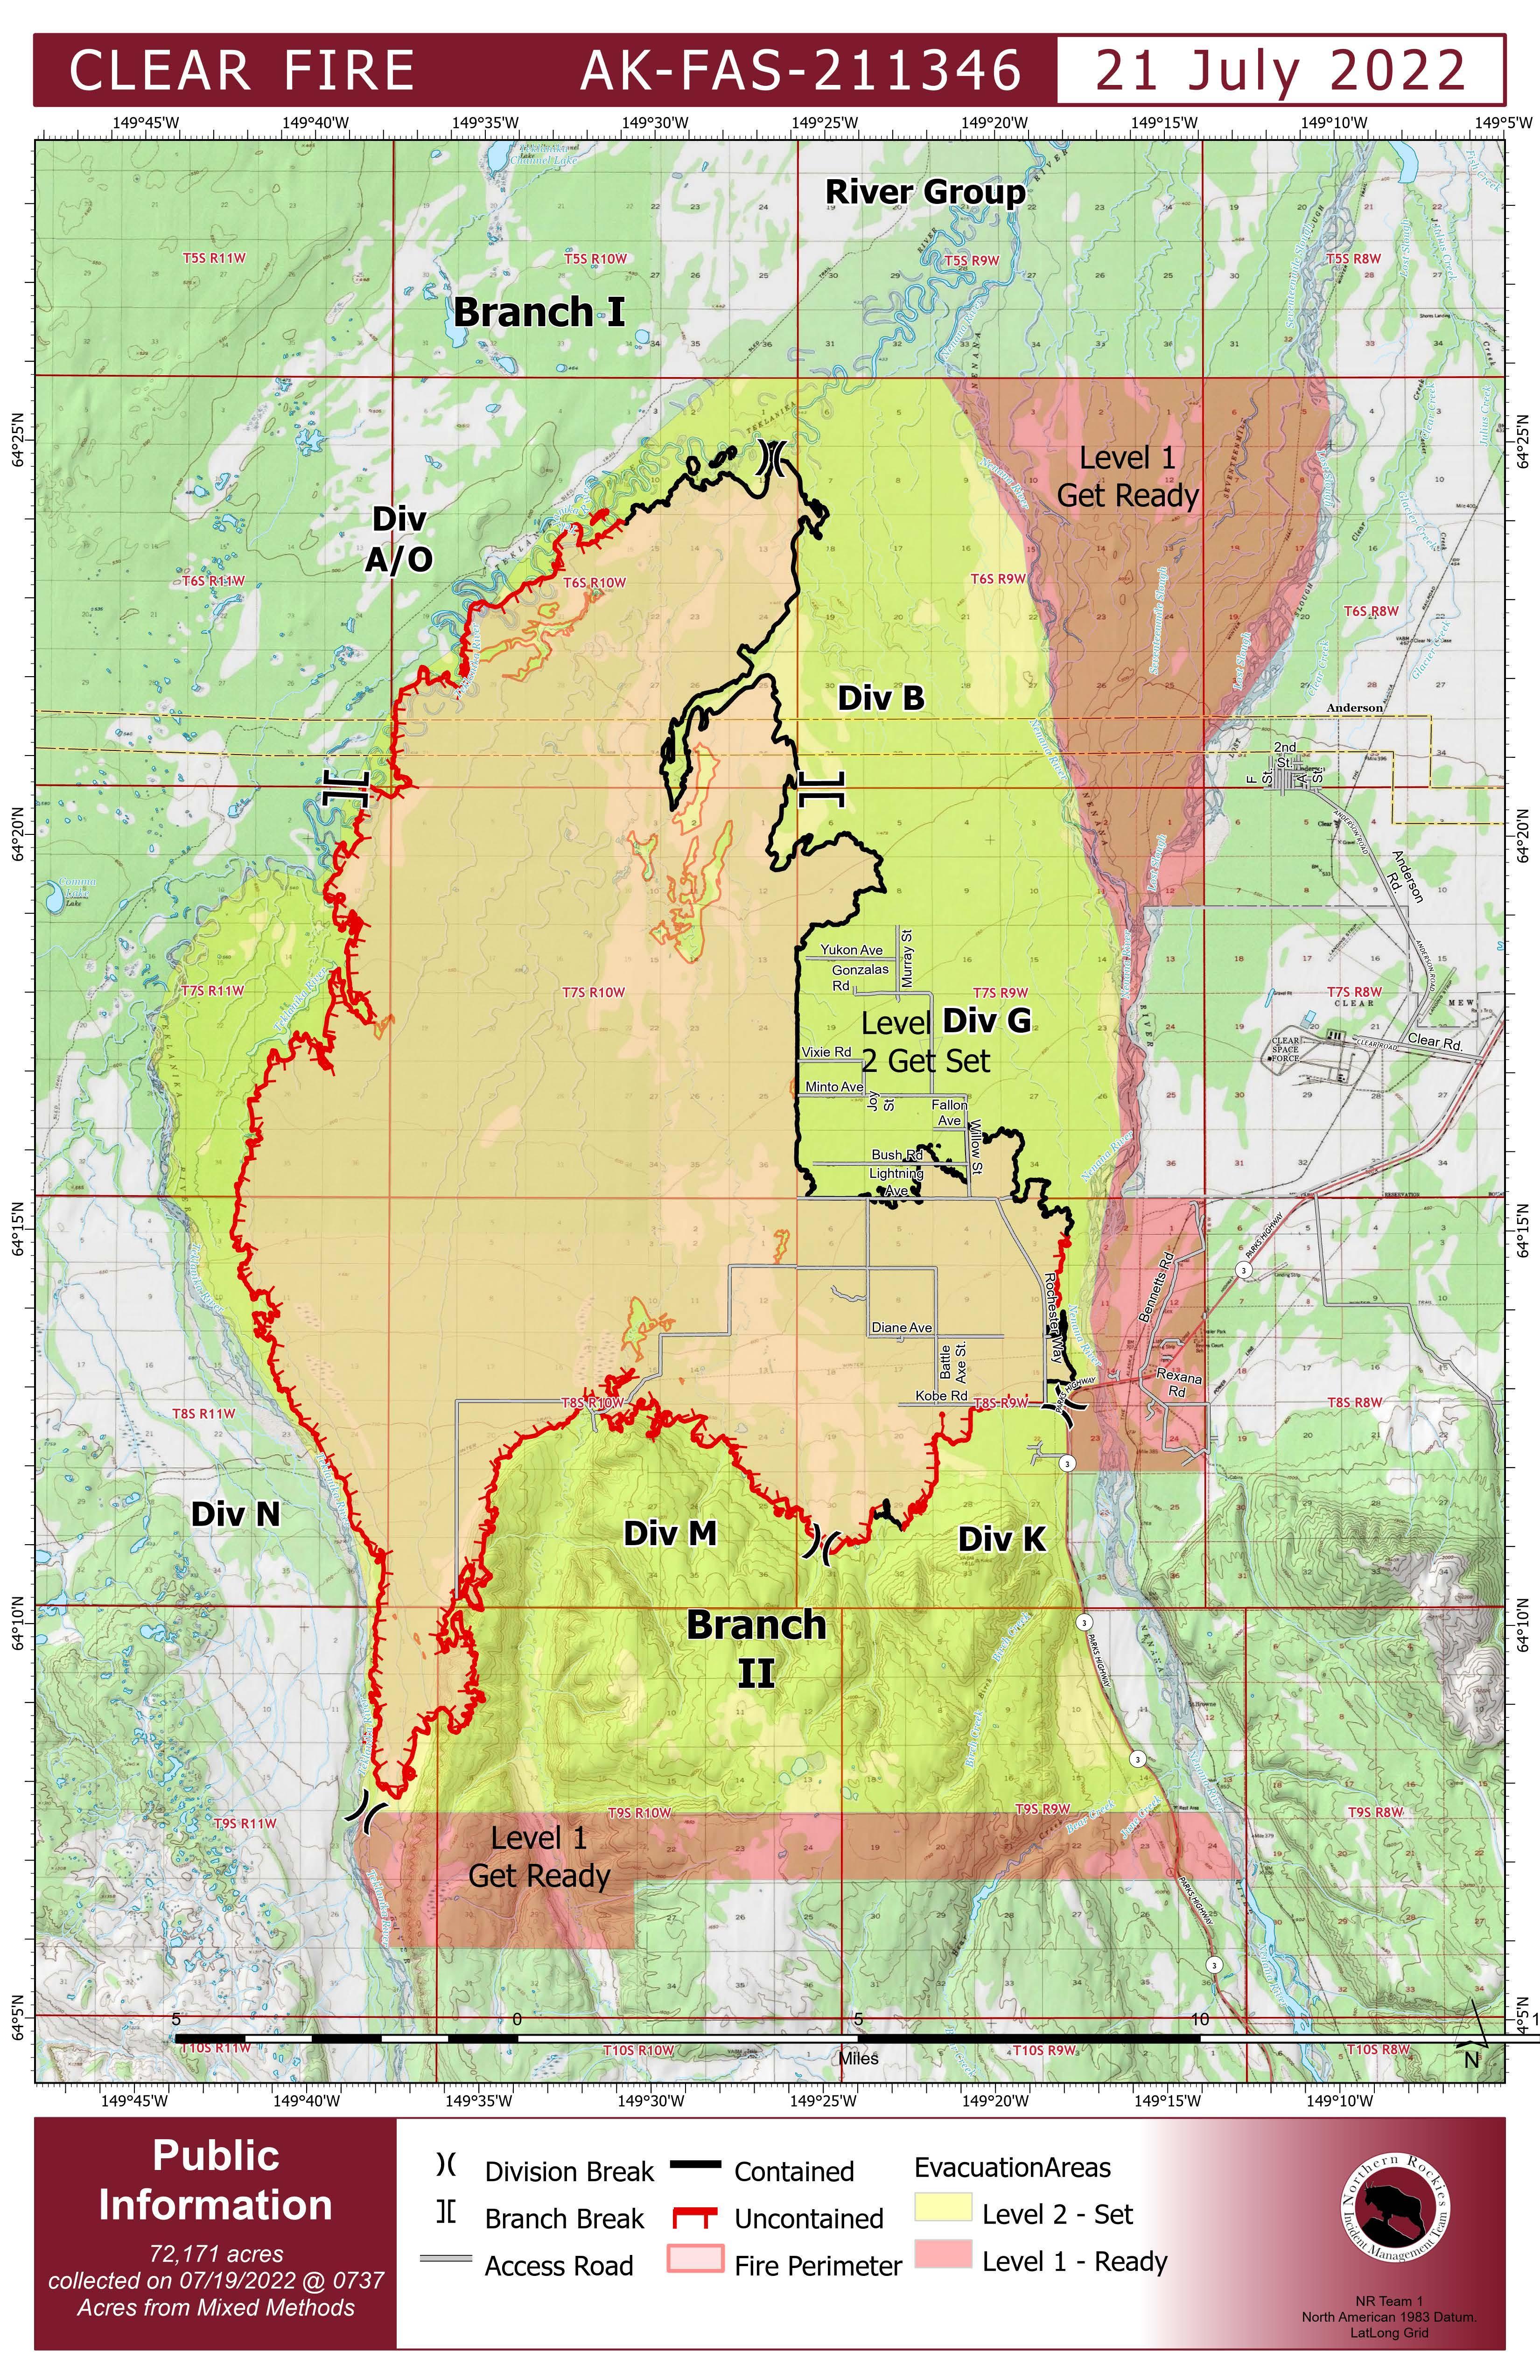 July 21 Map of the Clear Fire